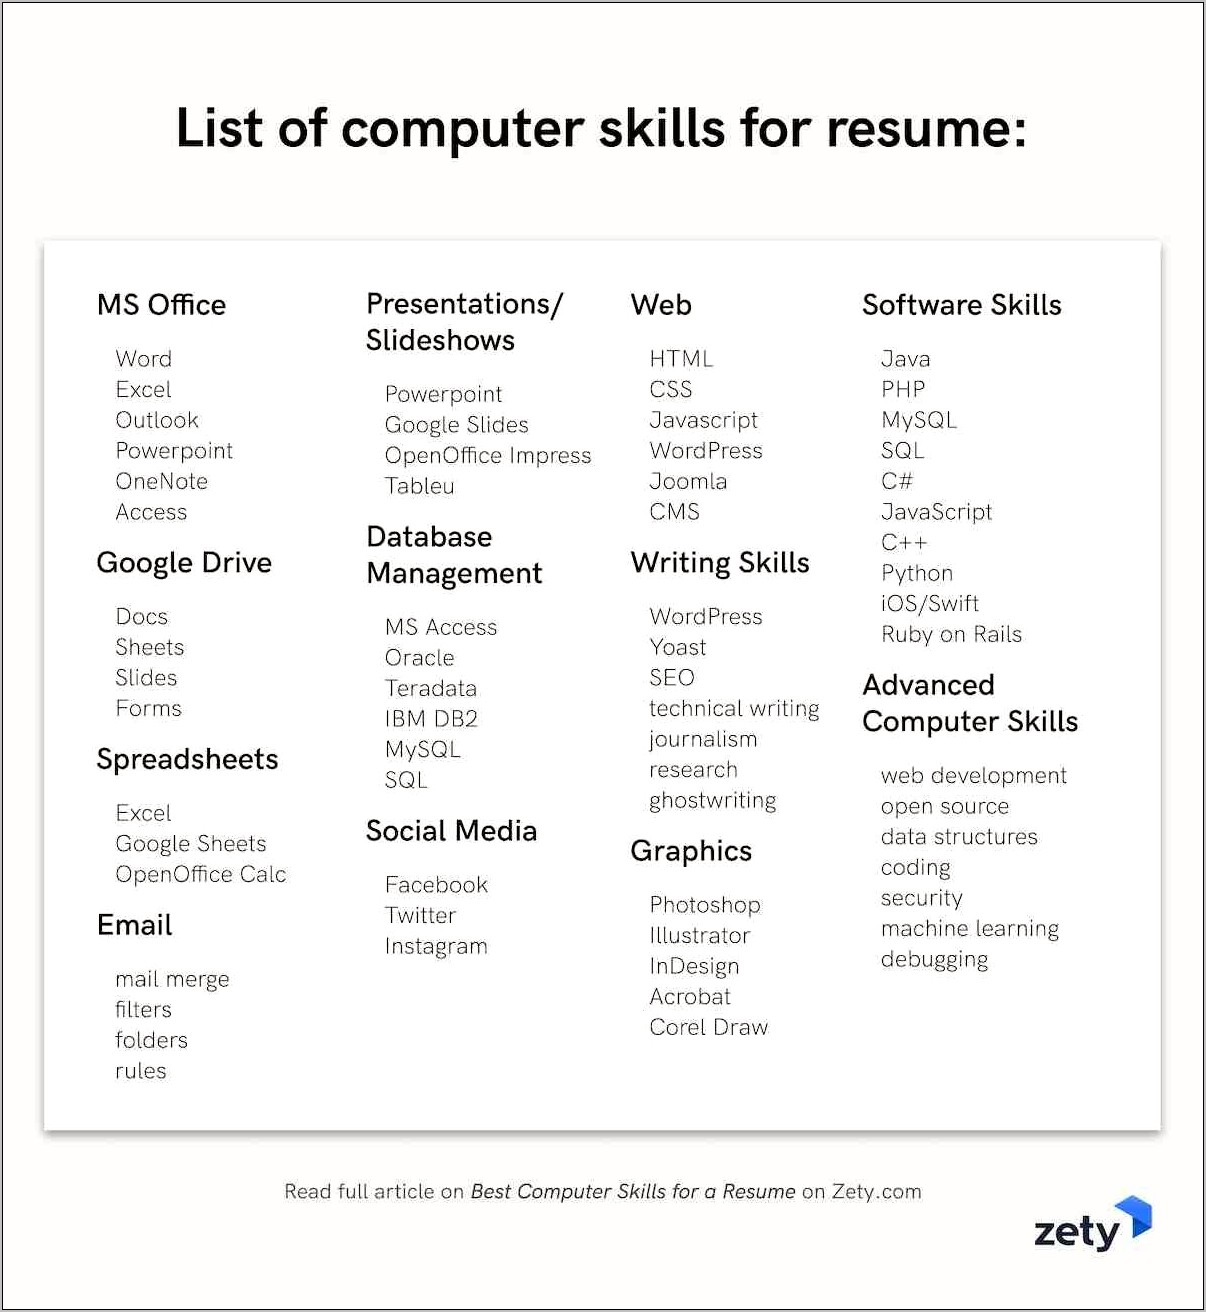 Skills That Should Be Added To A Resume